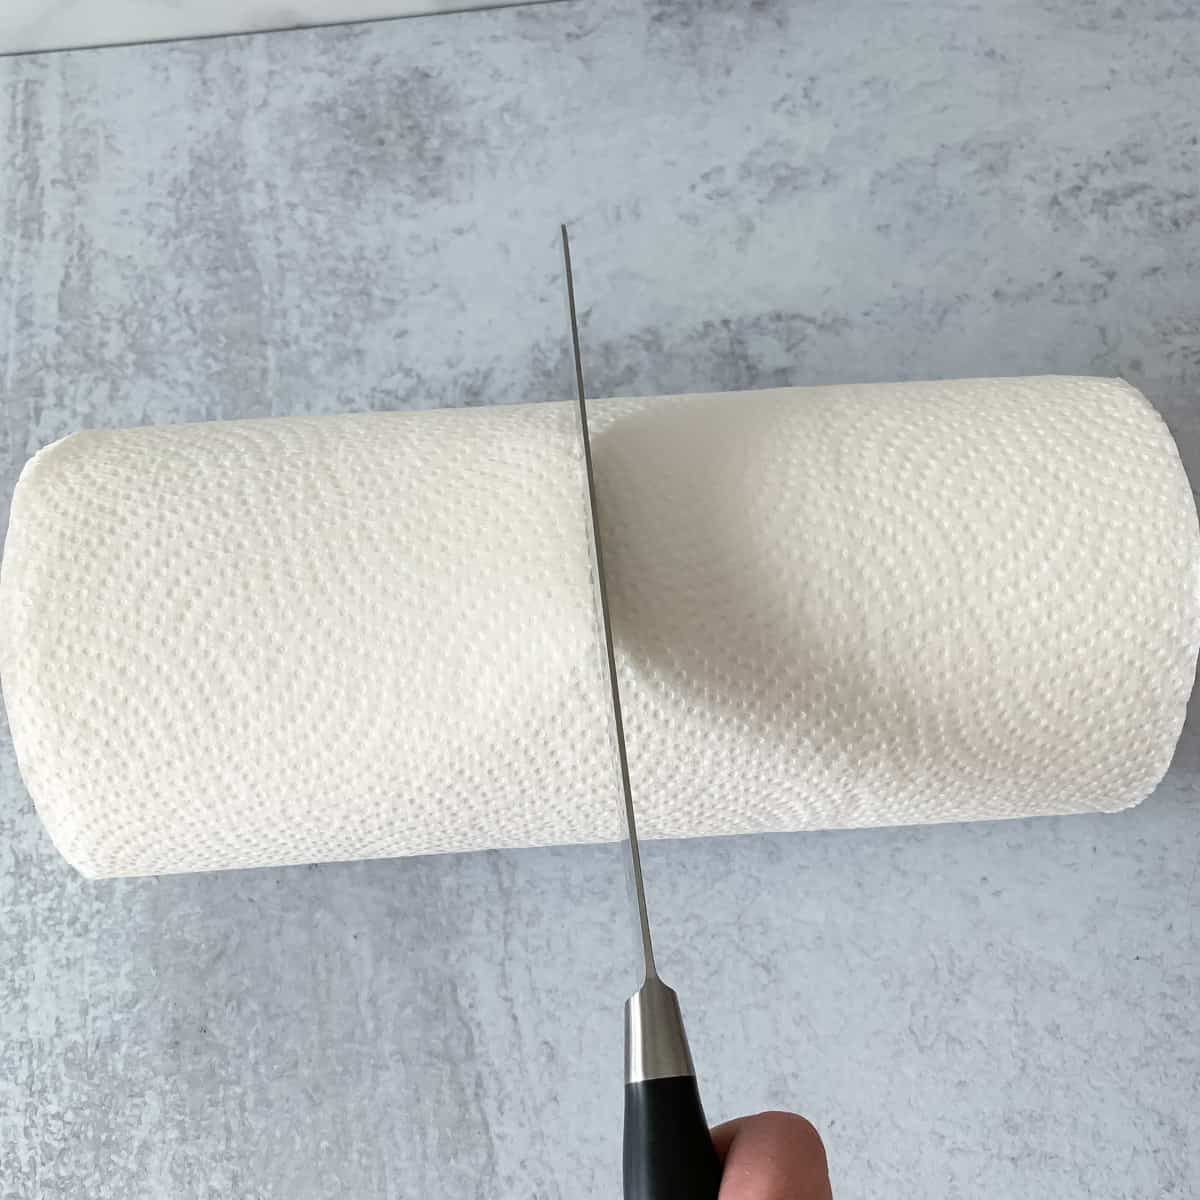 instructions cut paper towels in half for homemade wipes